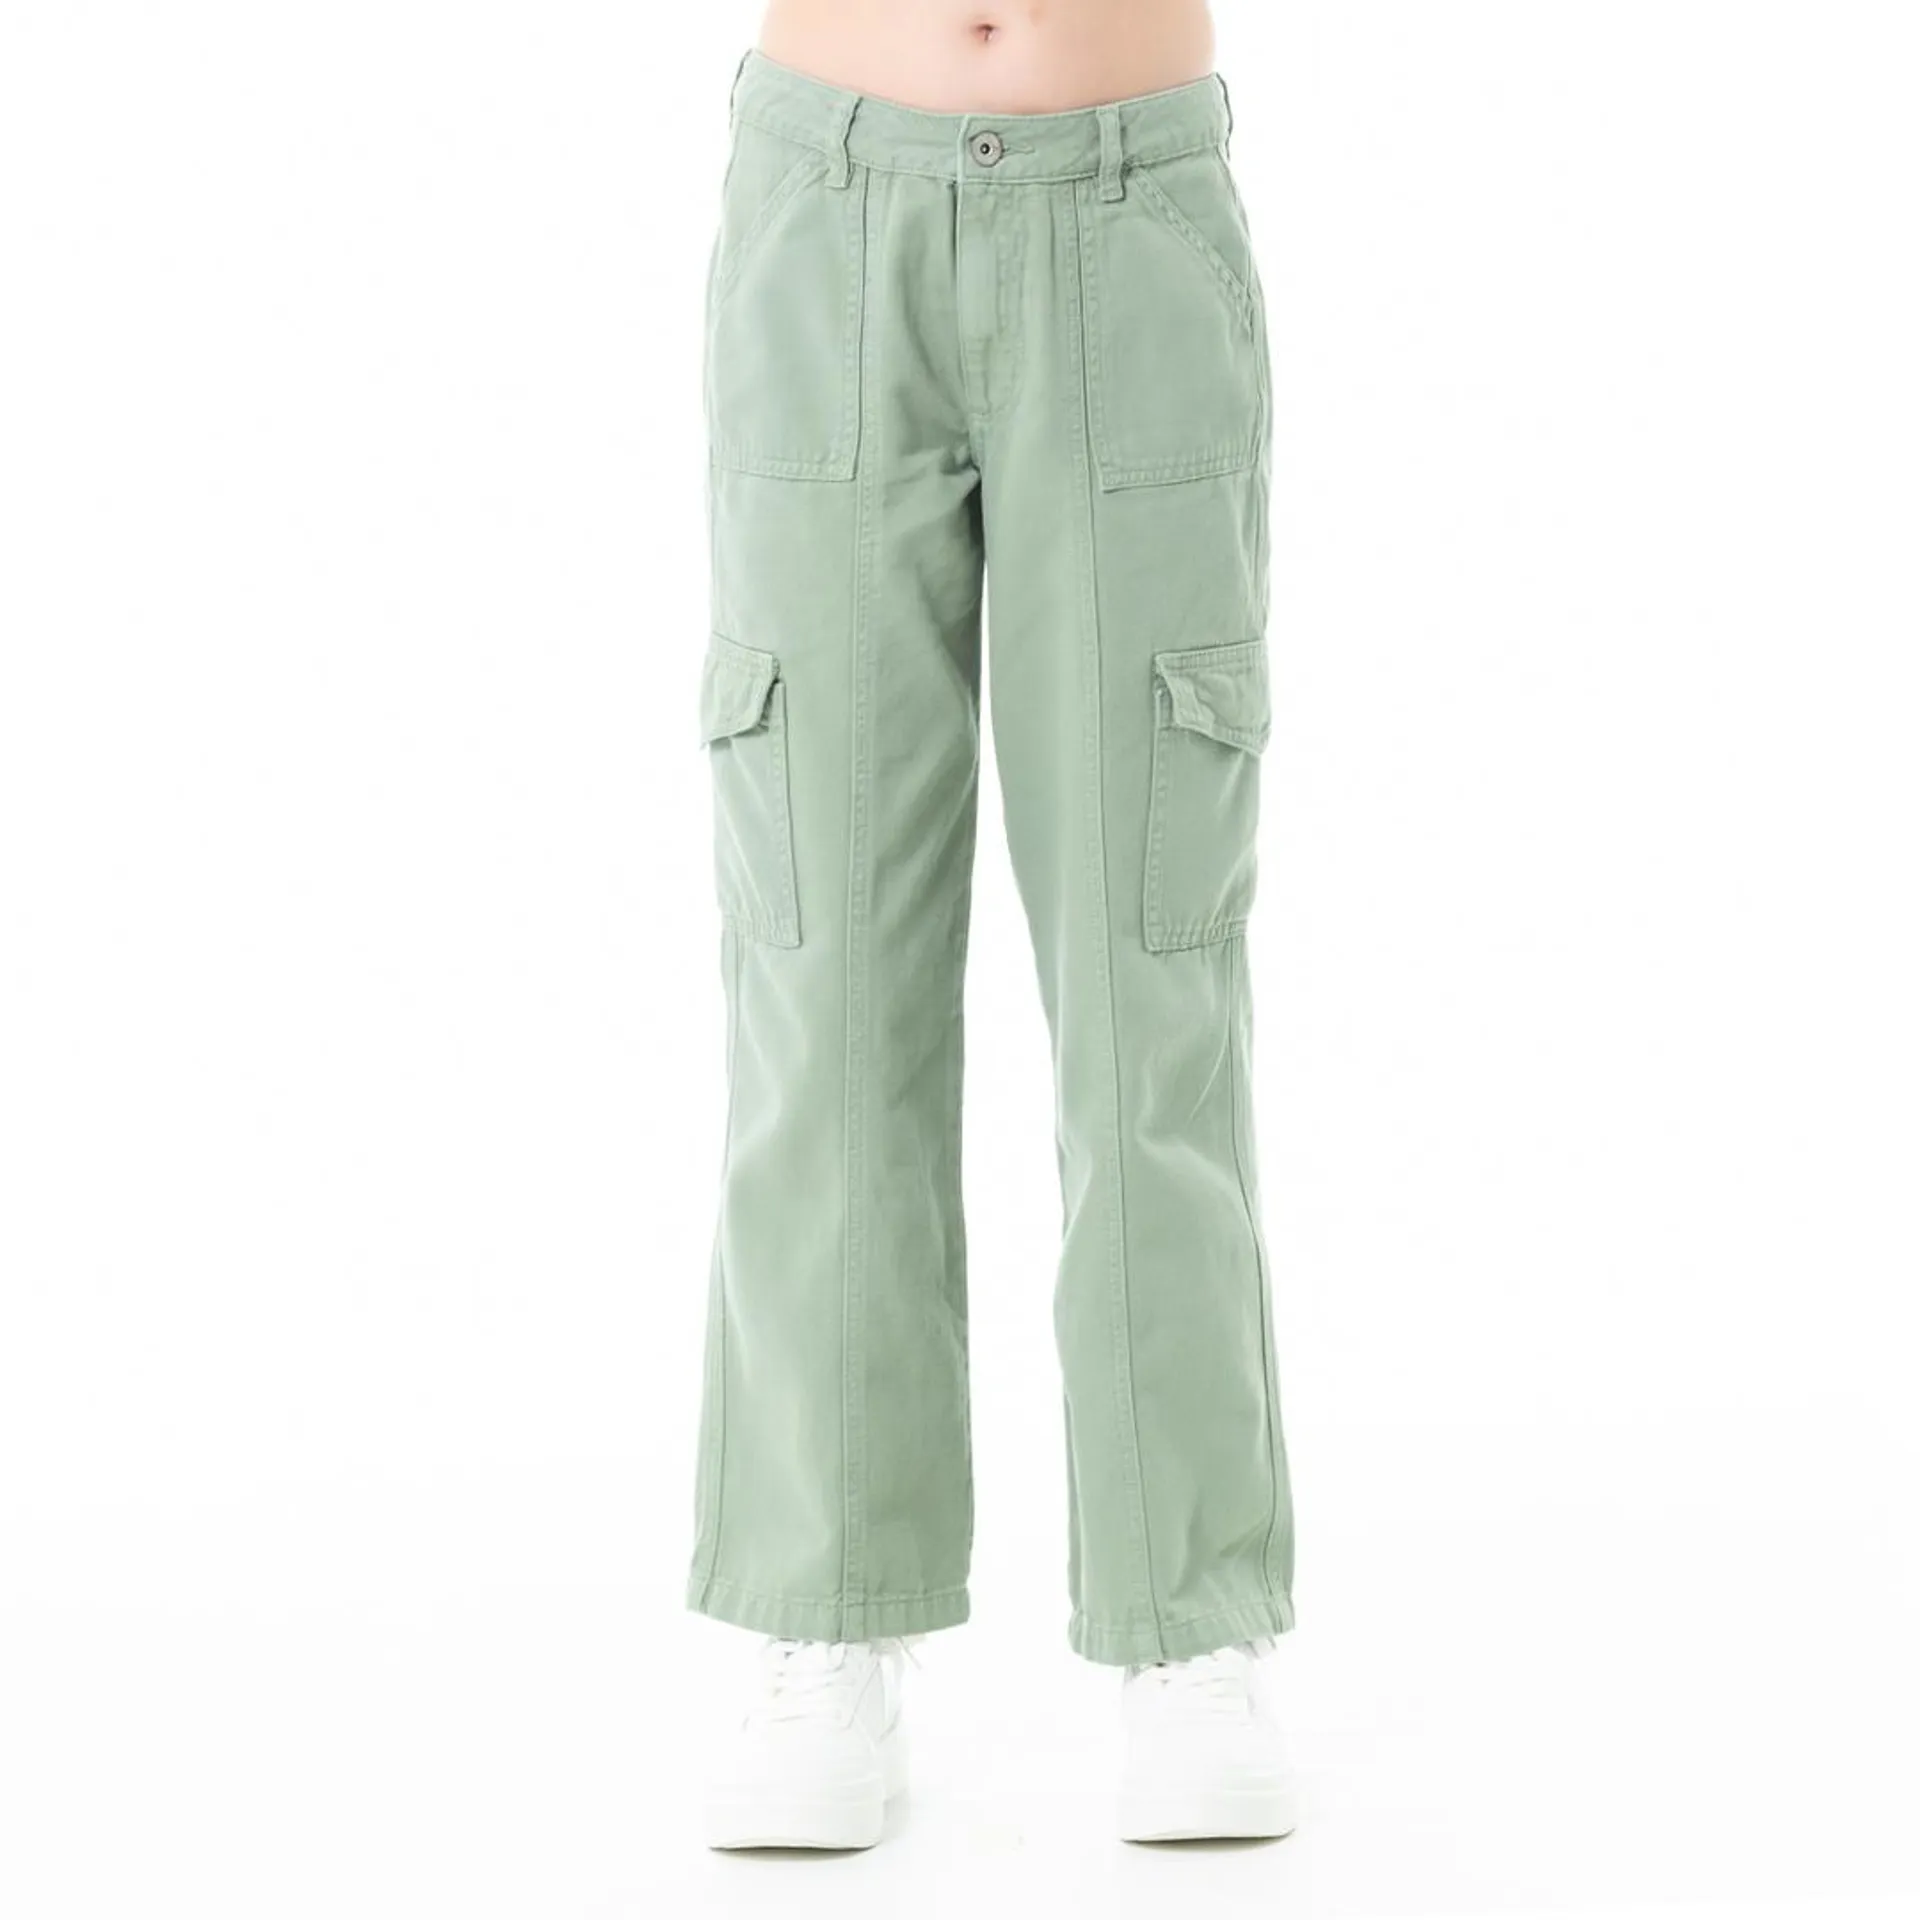 ARMY CARGO PANTS FOR GIRLS